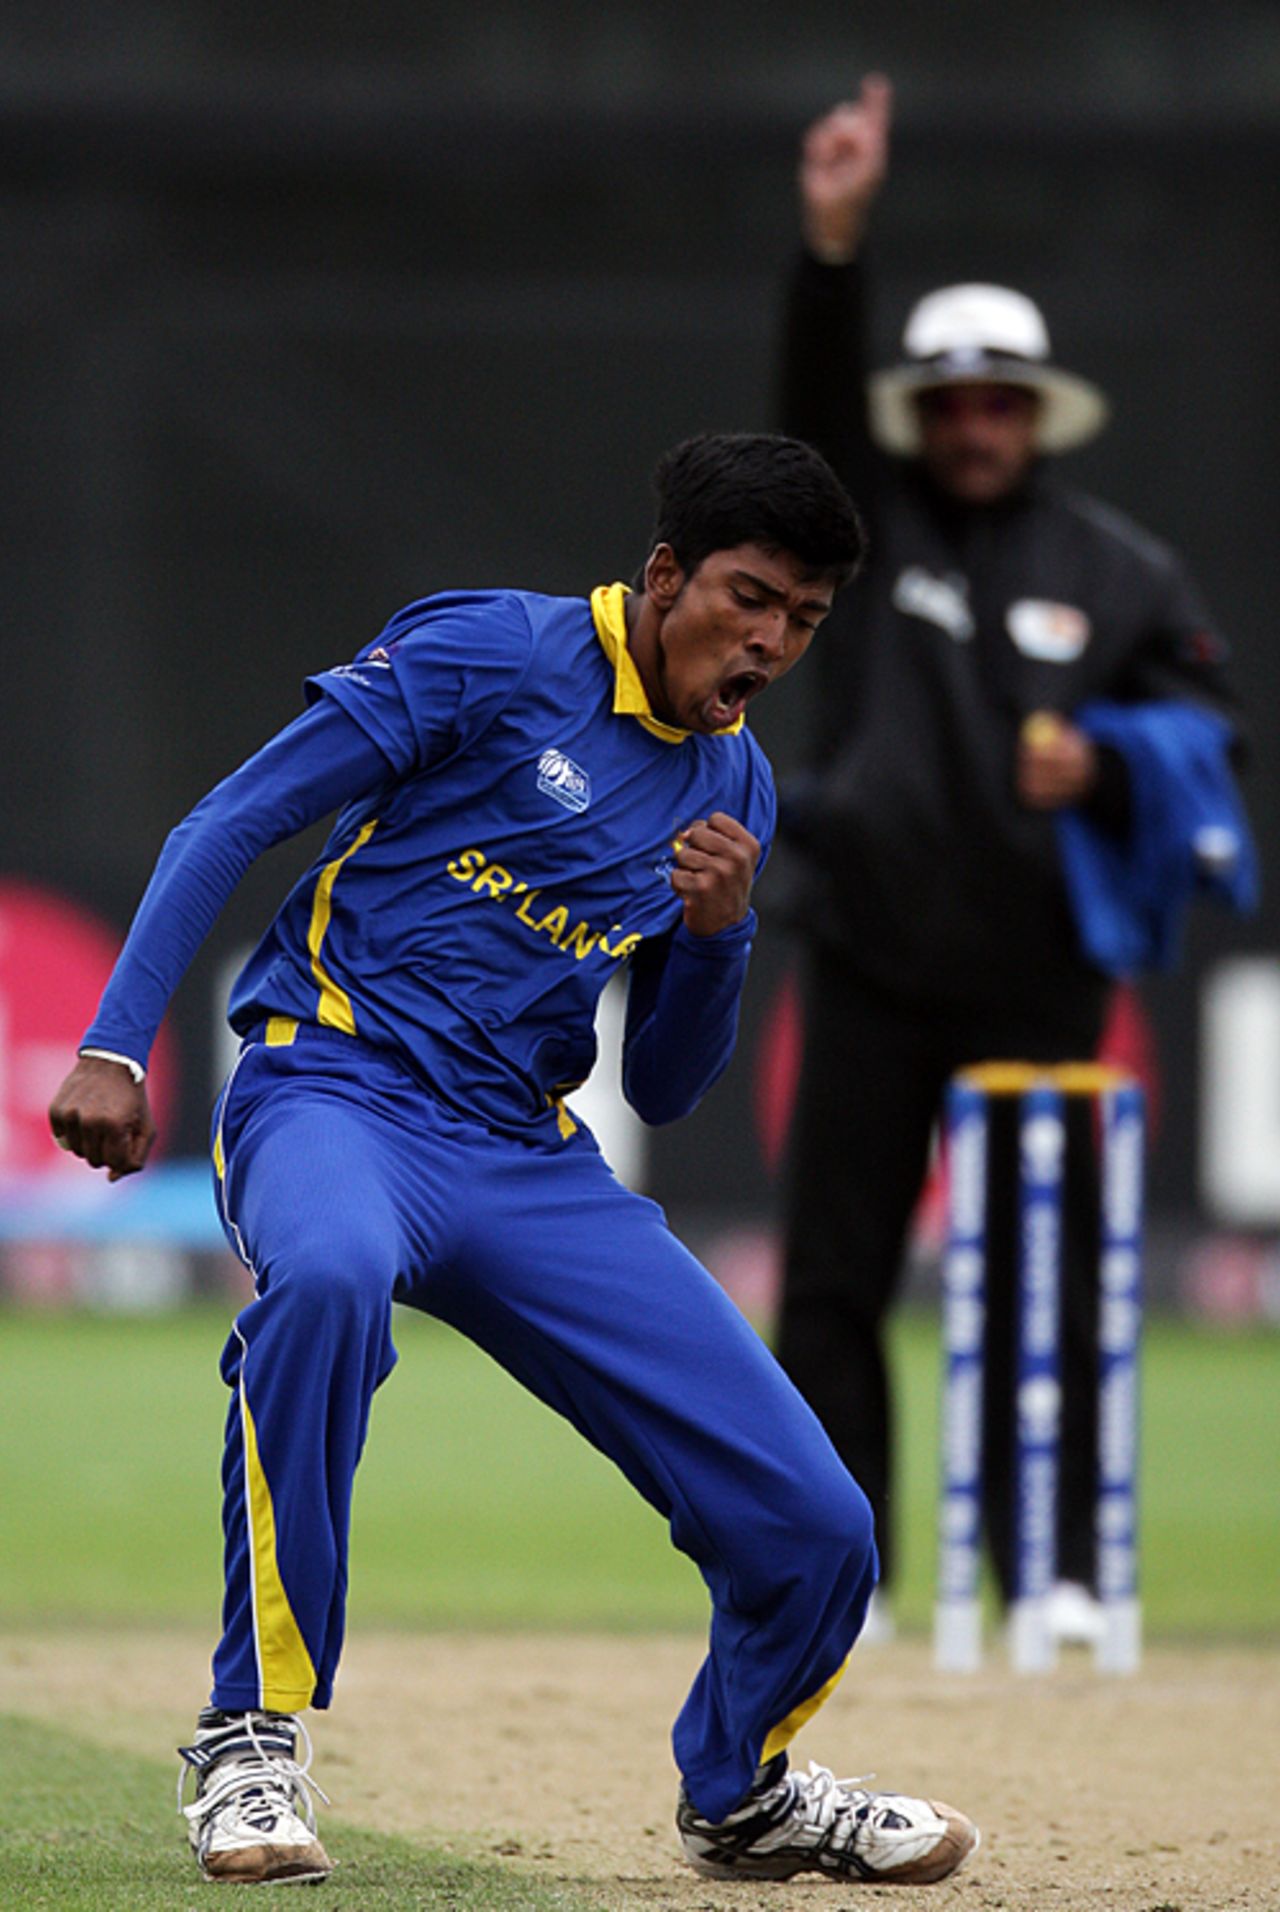 Charith Jayampathi punctuates one of his four wickets, South Africa Under-19s v Sri Lanka Under-19s, 2nd Quarter-Final, ICC Under-19 World Cup, Lincoln, January 24, 2010